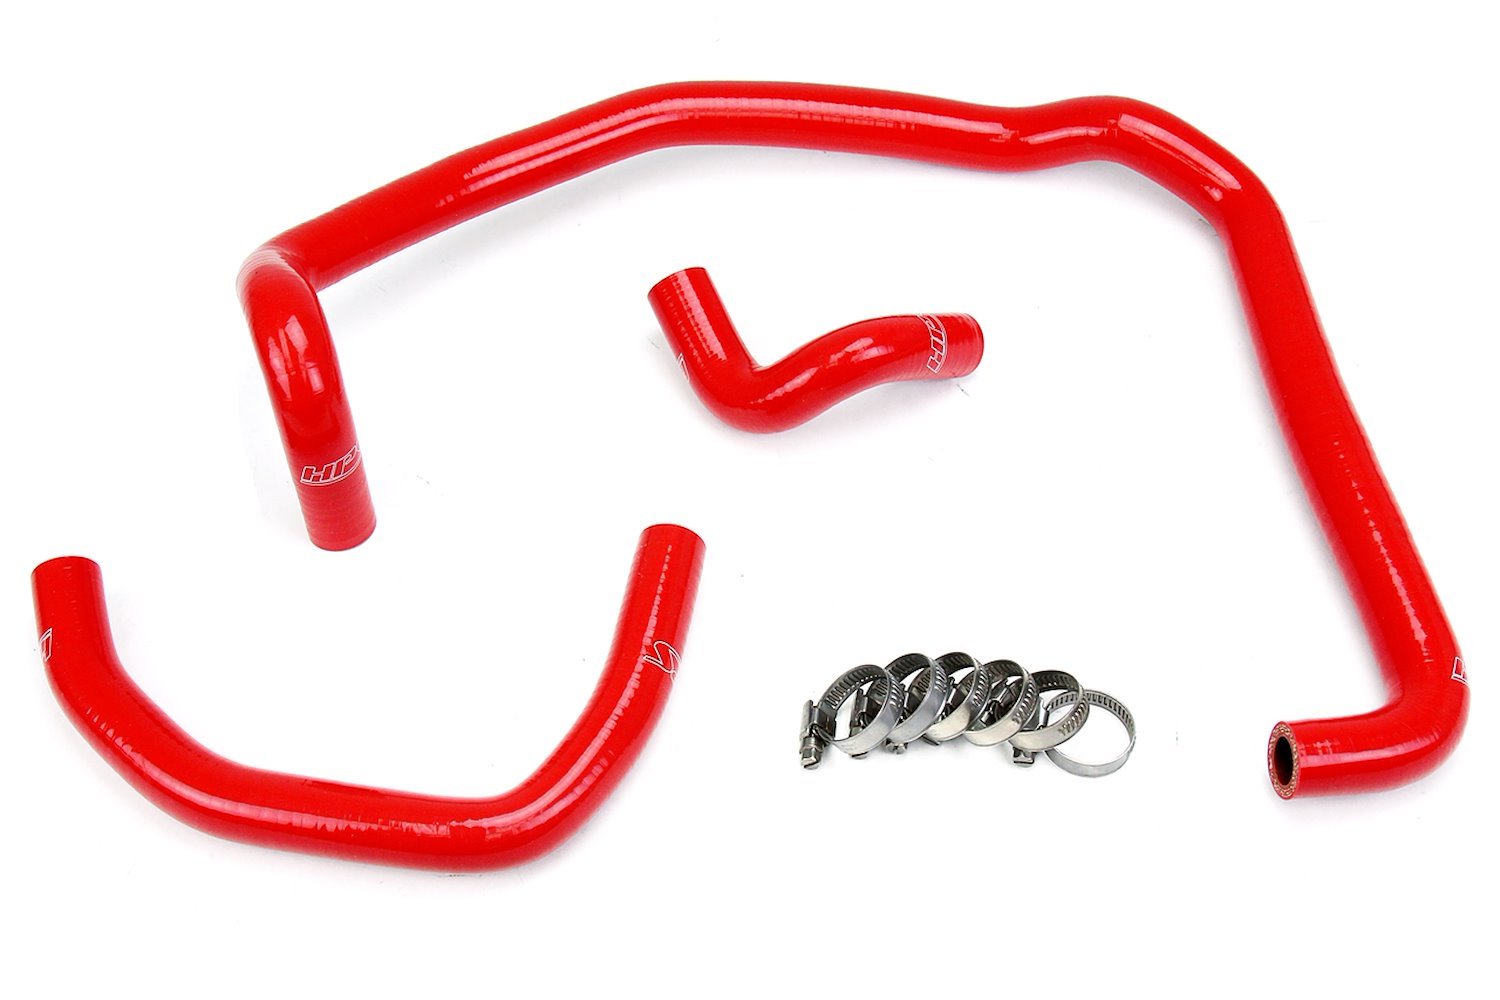 57-1746H-RED Heater Hose Kit, High-Temp 3-Ply Reinforced Silicone, Replace OEM Rubber Heater Coolant Hoses